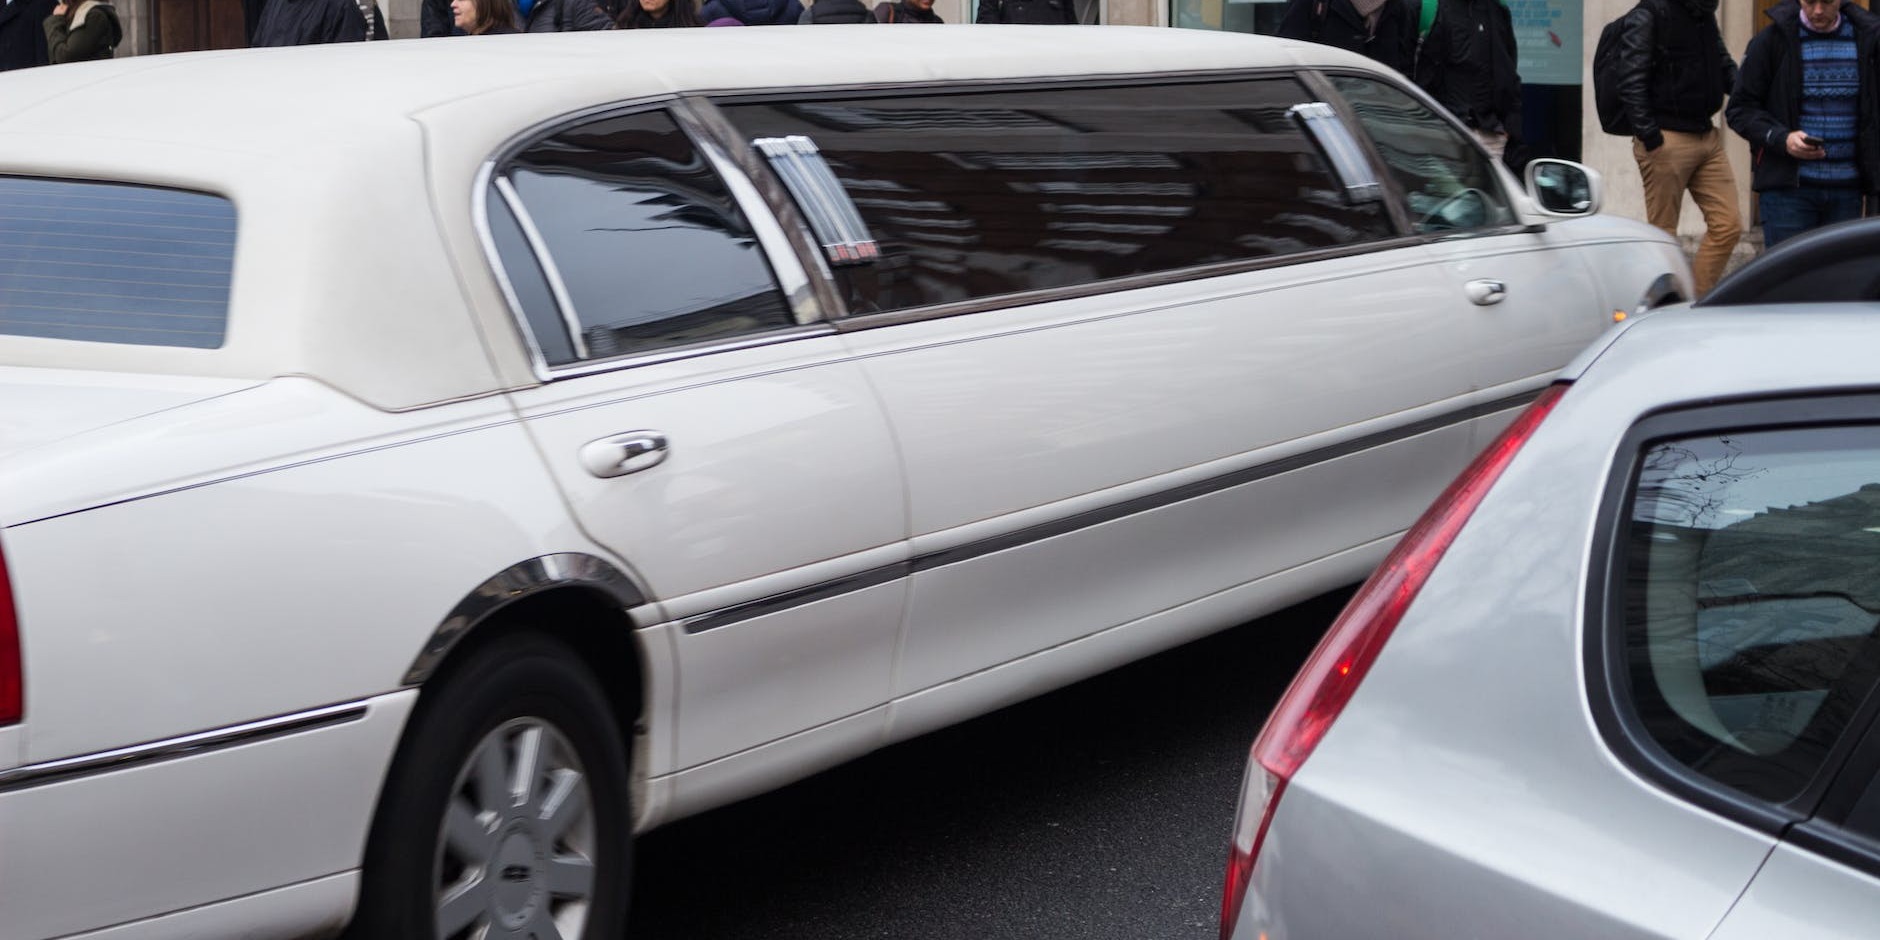 The Ultimate Guide to Hiring a Limo for your Prom in London